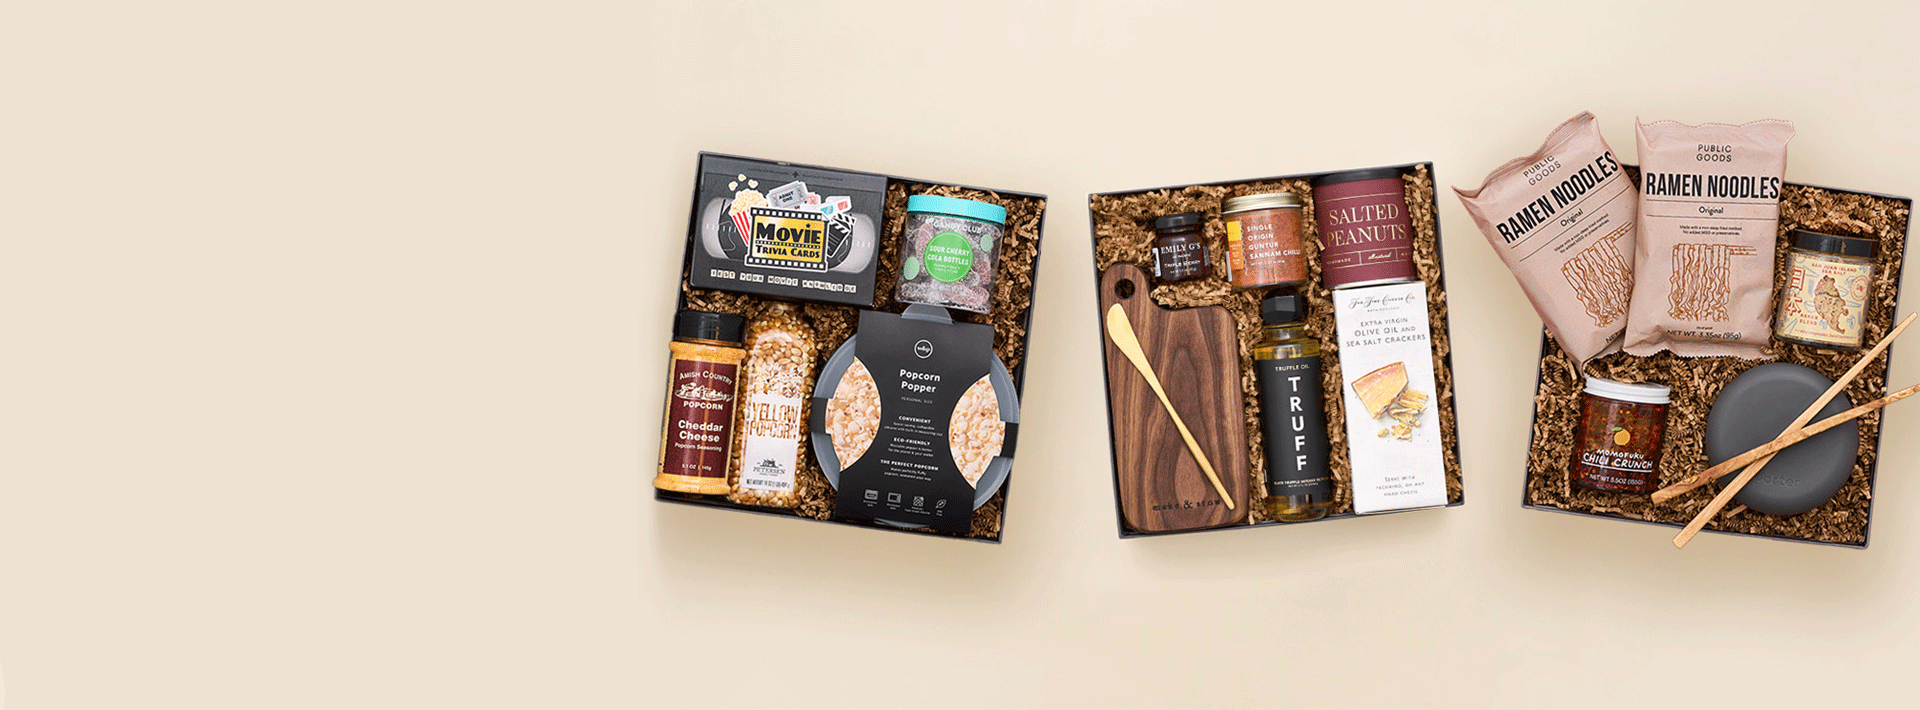 Corporate Gifting Catalog Gift Sets